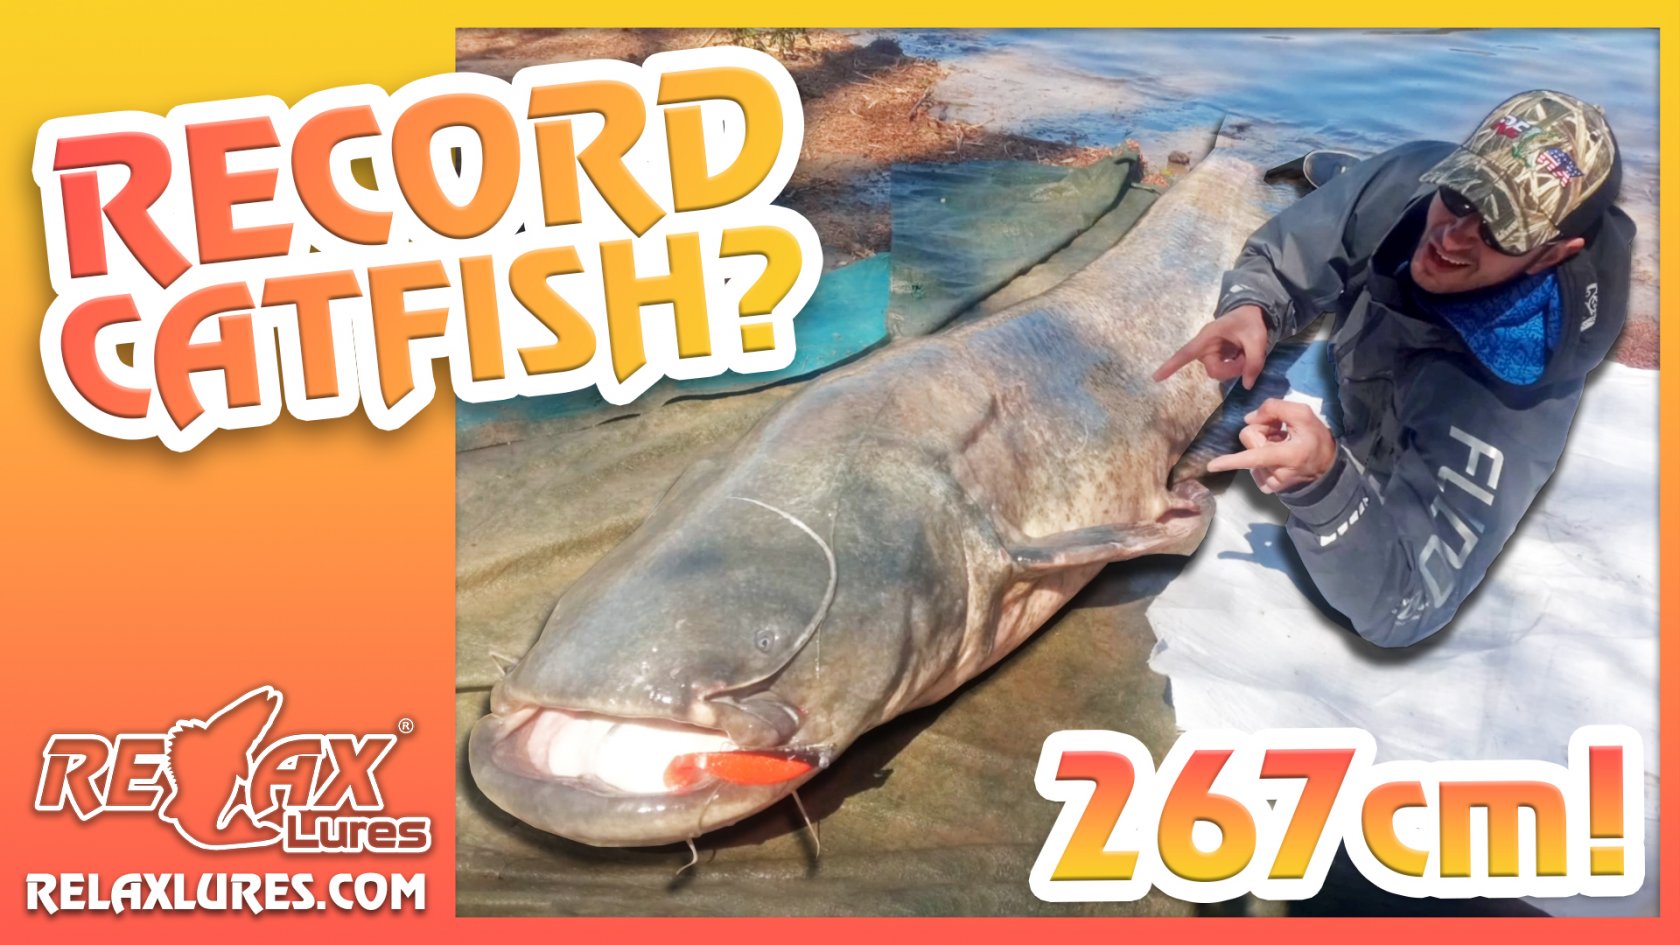 RECORD CATFISH - 267CM! - RELAX LURES